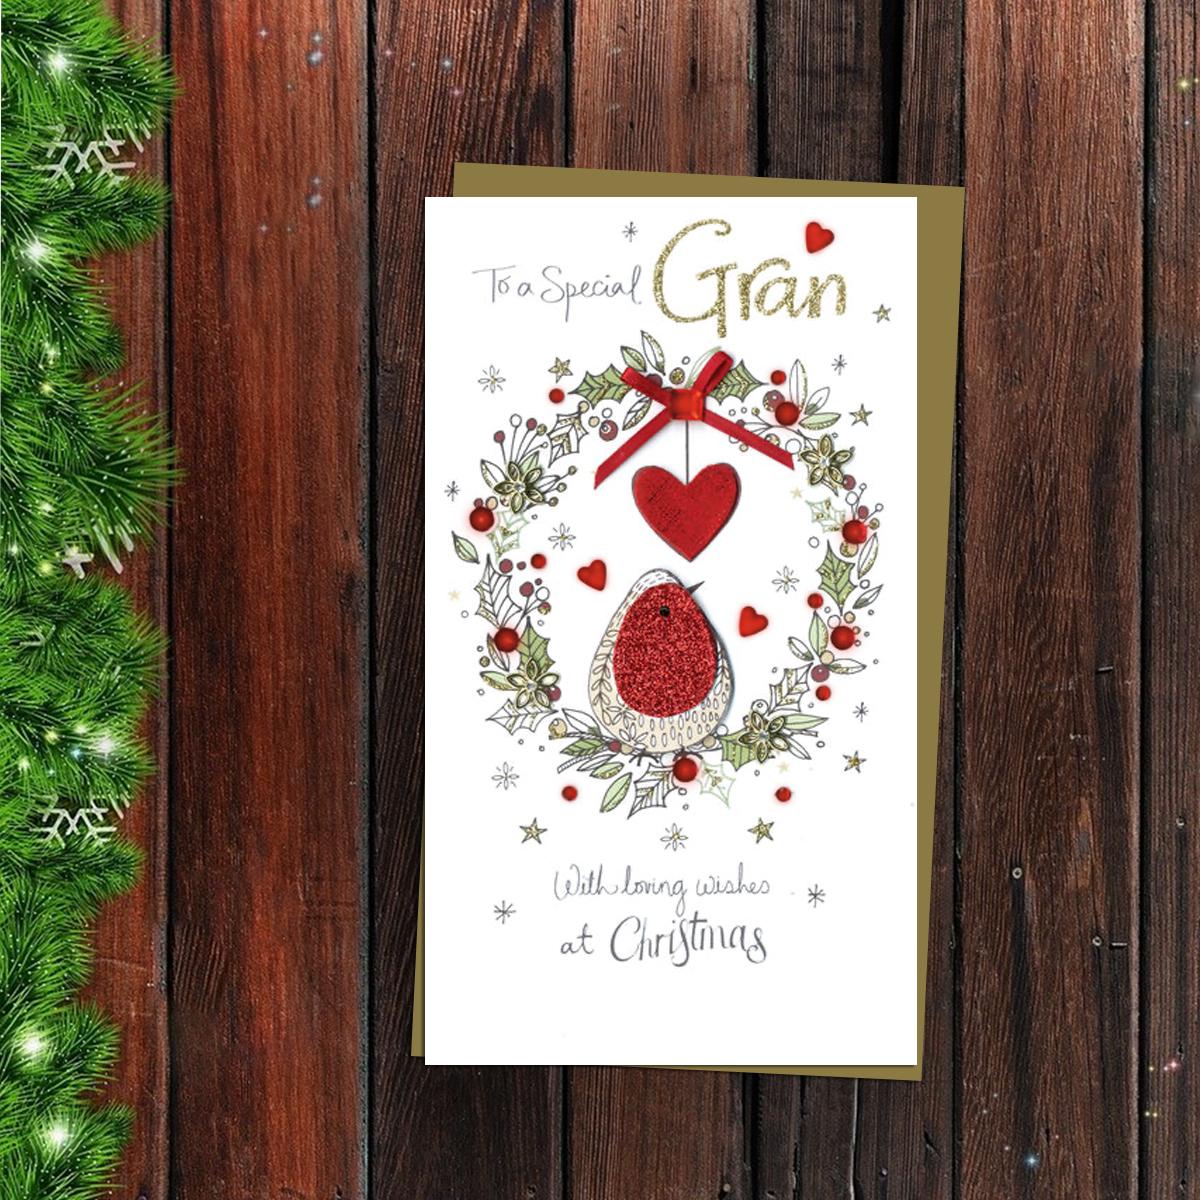 Special Gran Christmas Card Alongside Its Gold Envelope